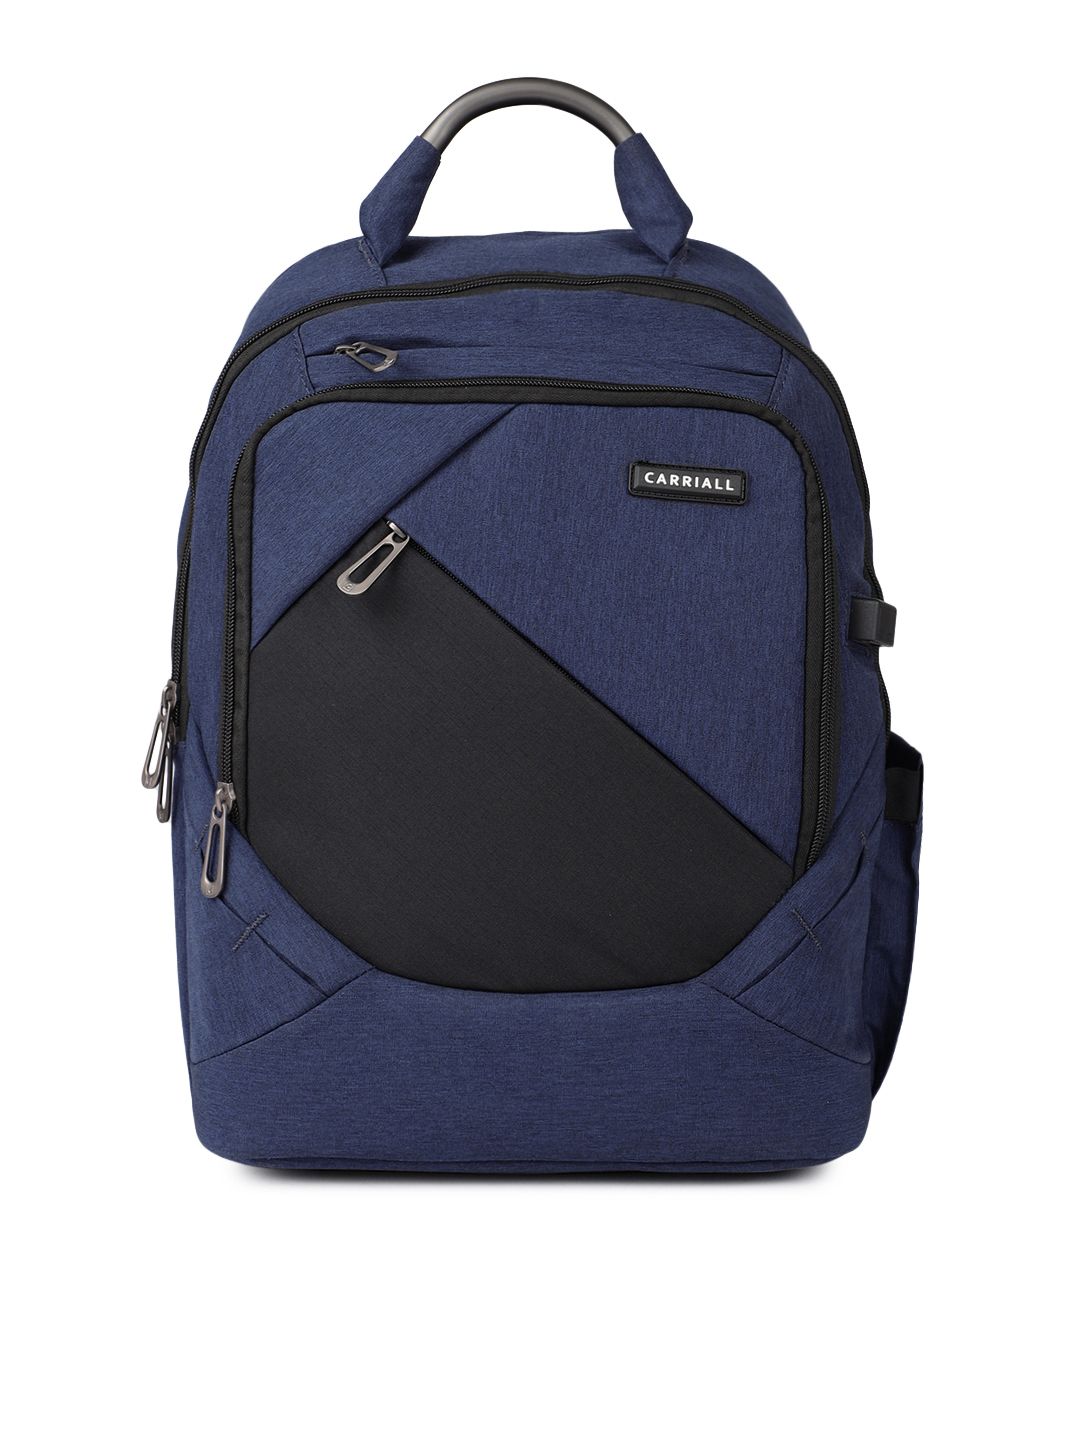 CARRIALL Unisex Blue & Black Colourblocked Smart Laptop Backpack with Charging port Price in India